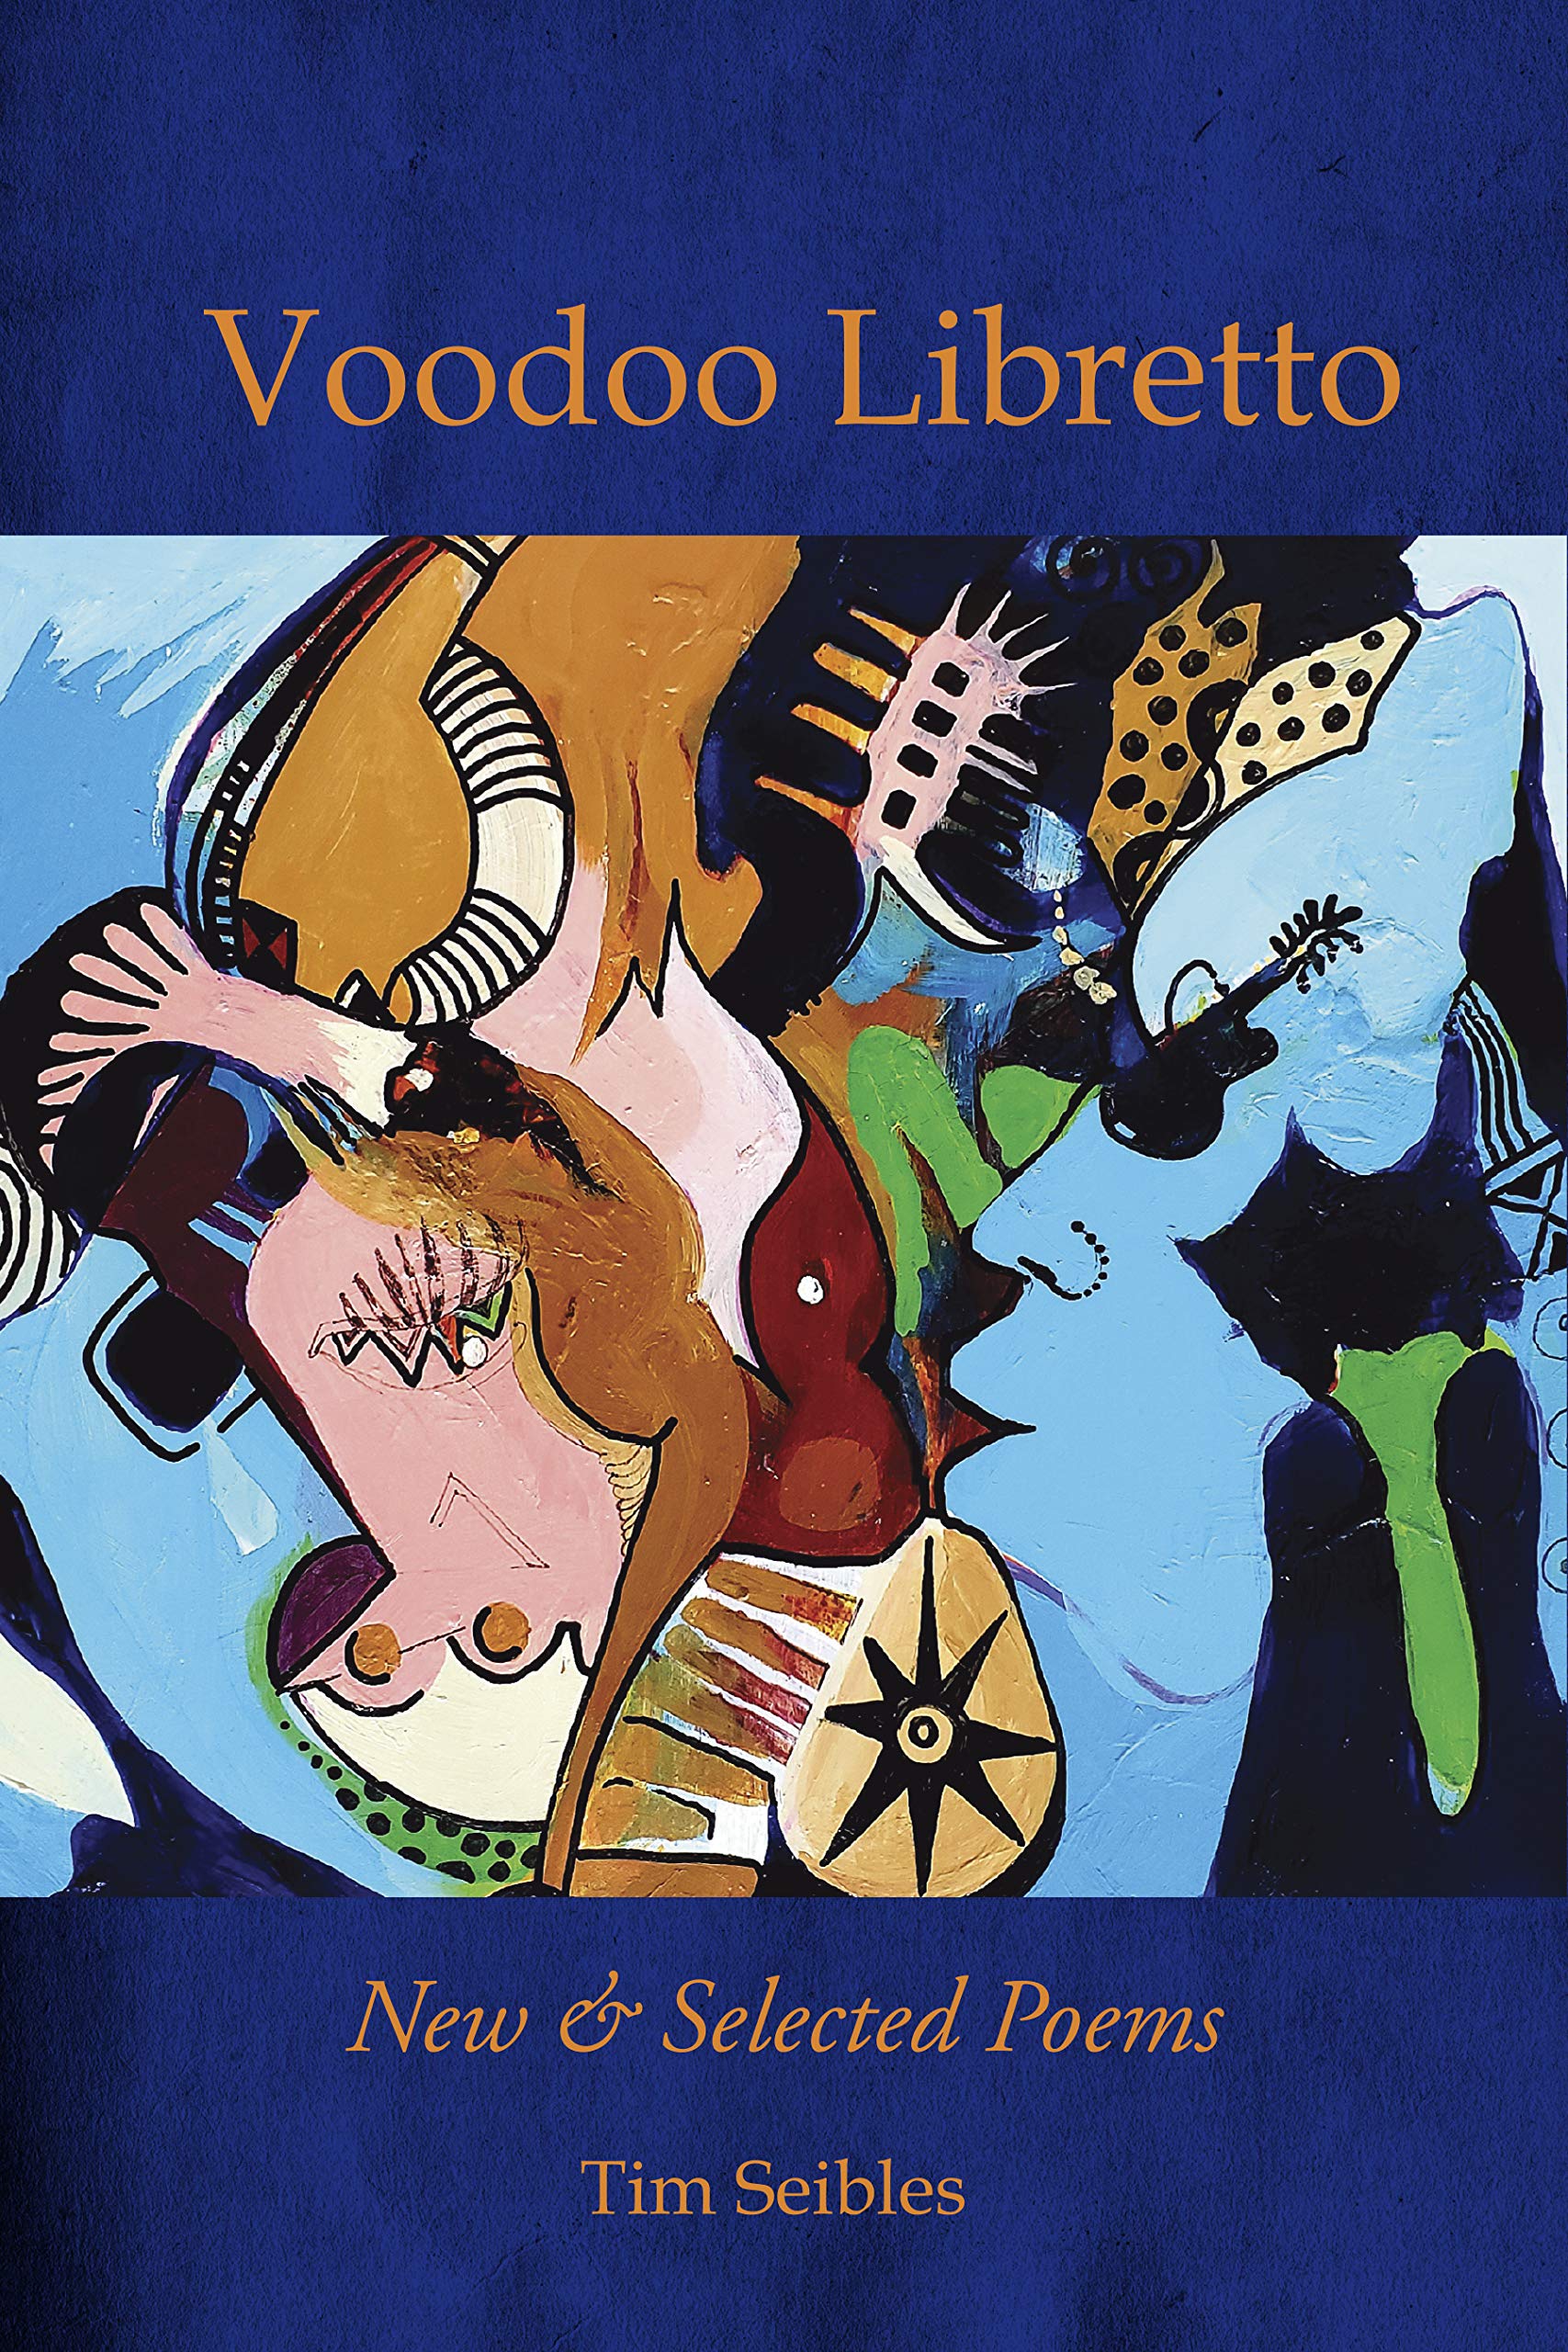 Book Cover Image of “Voodoo Libretto”